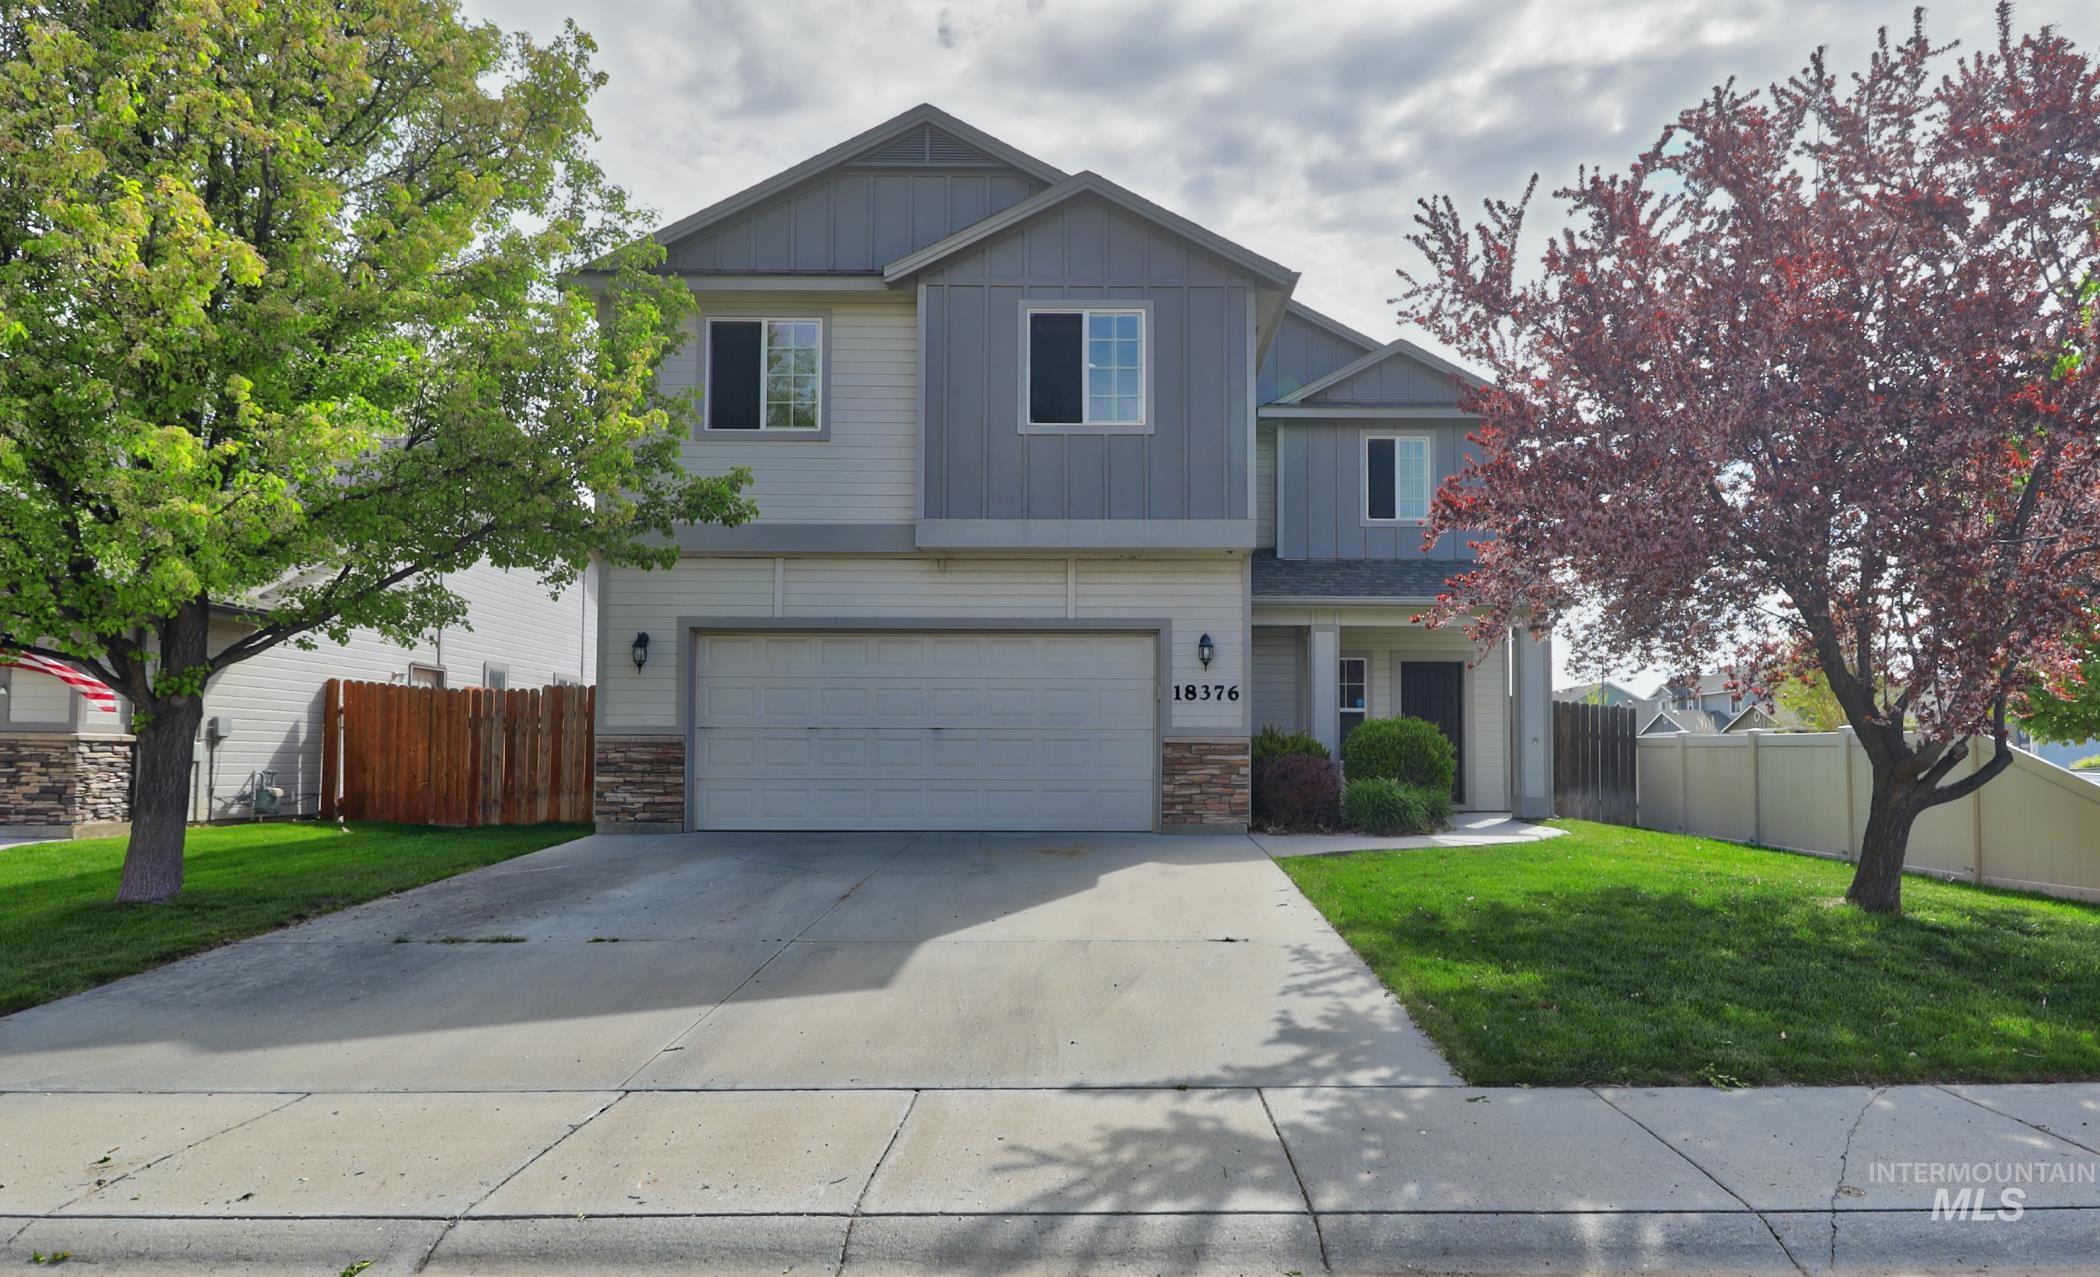 18376 Spicebush Ave, Nampa, Idaho 83687, 4 Bedrooms, 2.5 Bathrooms, Residential For Sale, Price $424,900,MLS 98908010